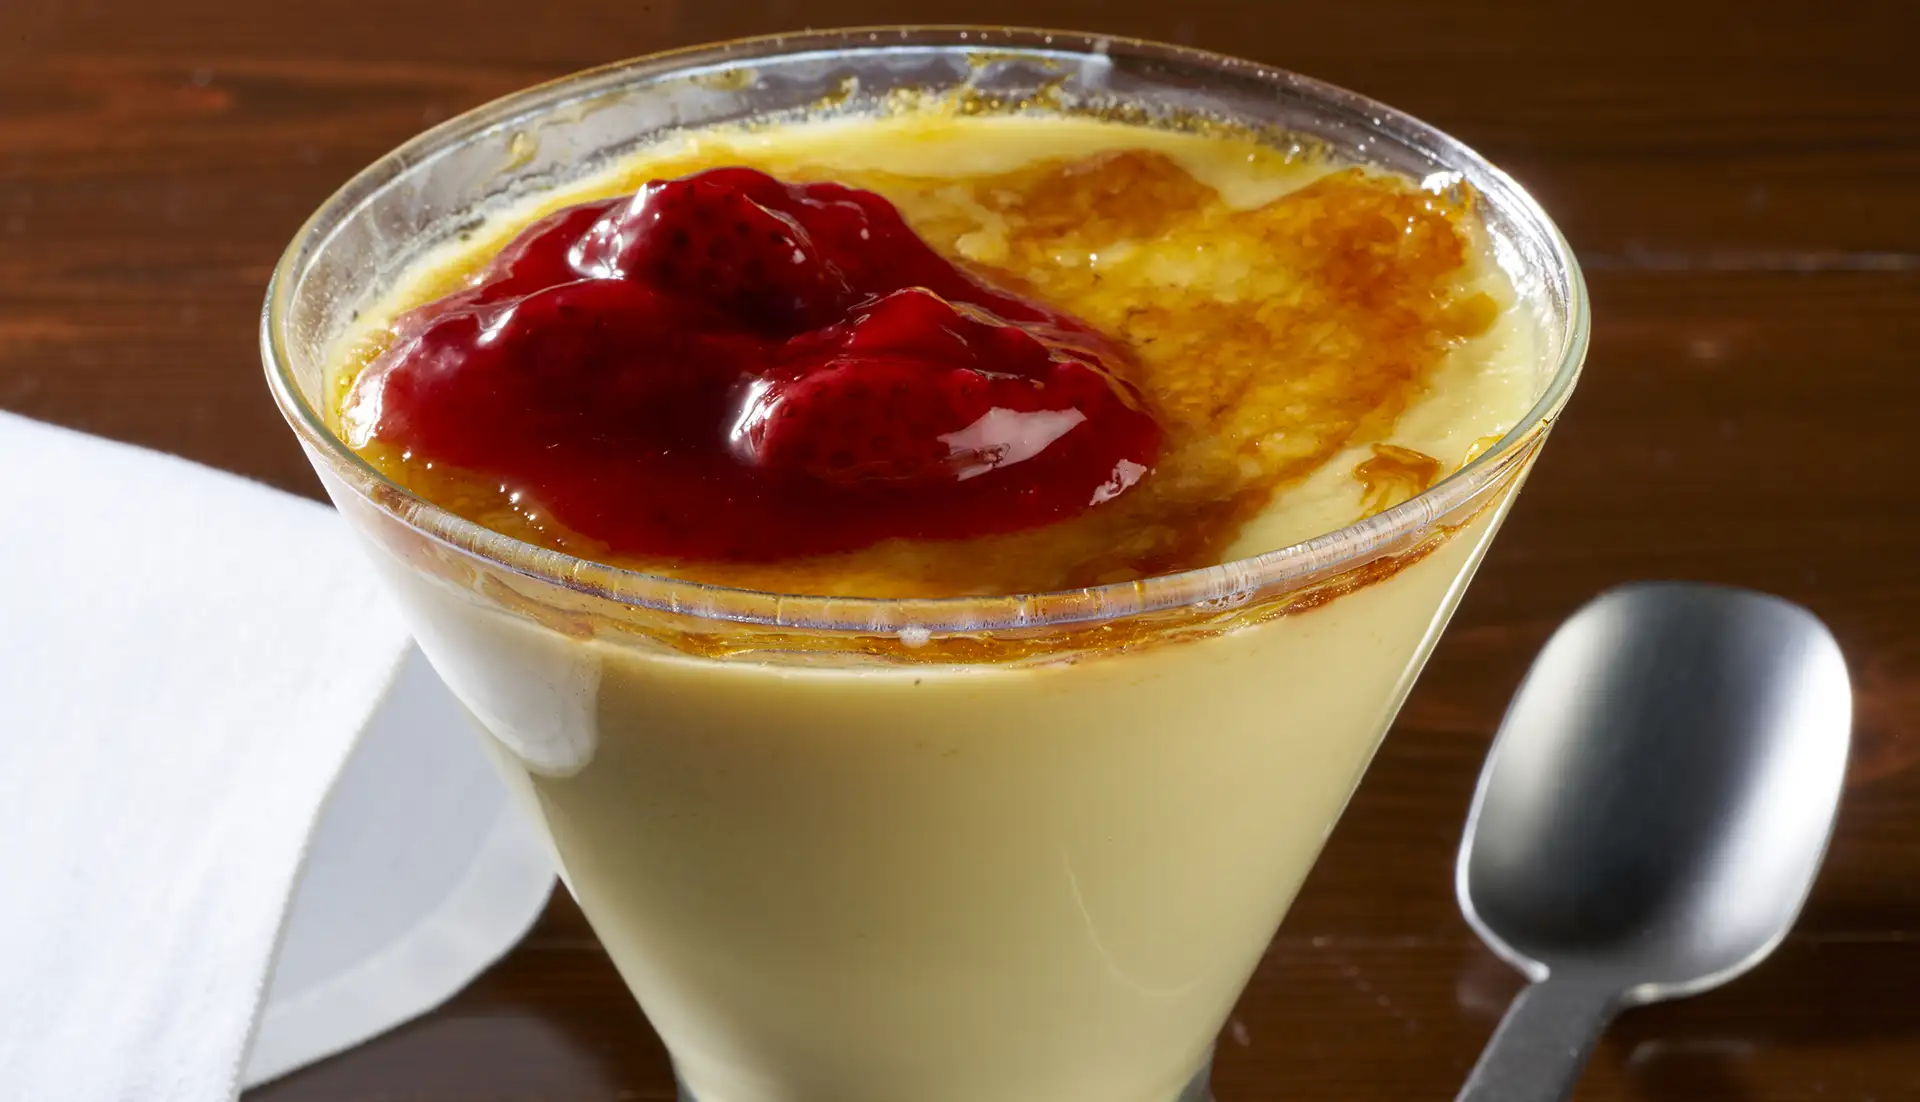 Our version of Crème Brûlée begins with white chocolate custard, we then add a healthy dab of strawberry topping on its caramelized sugar top.